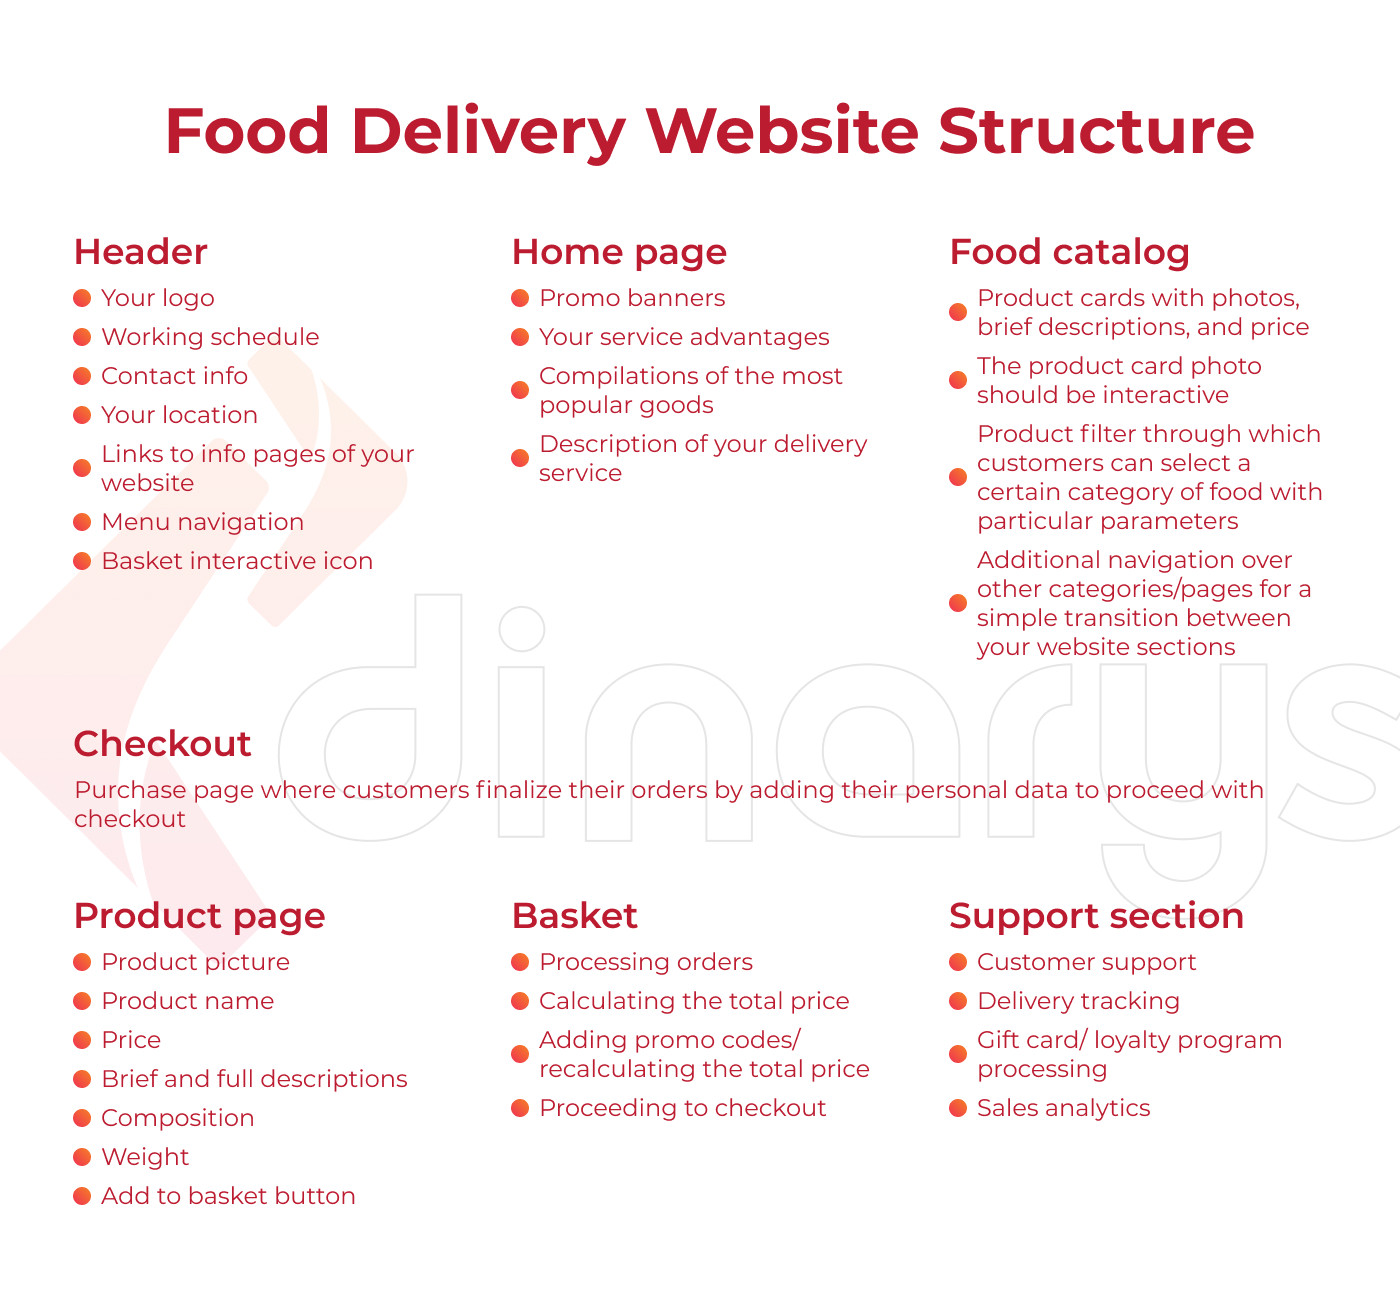 Food Delivery Website Structure